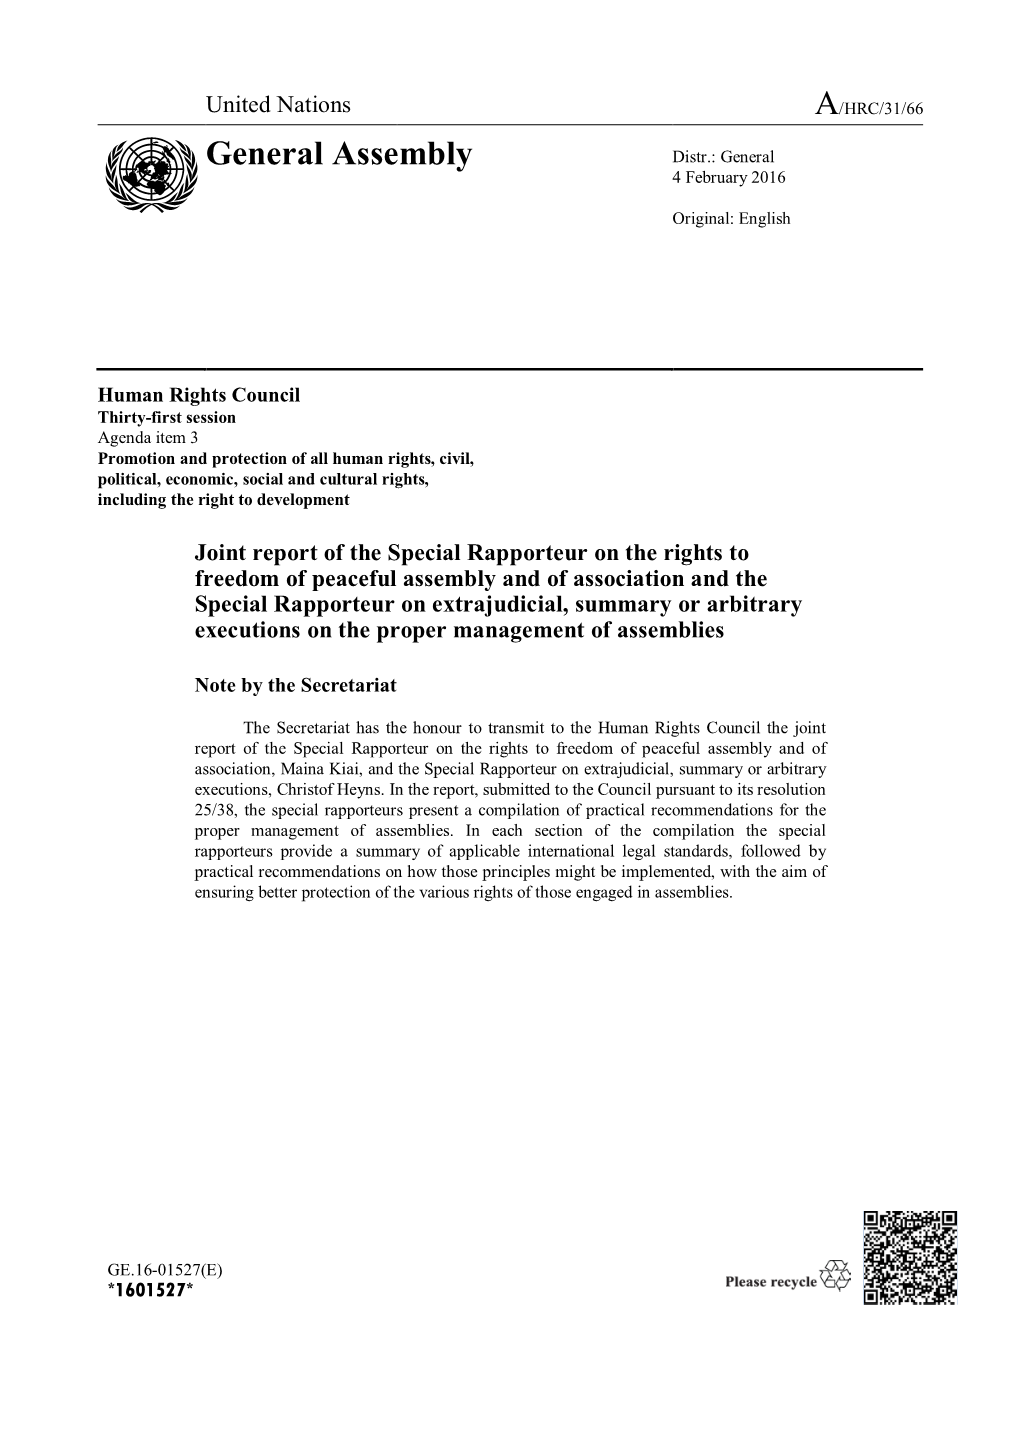 Joint Report of the Special Rapporteur on the Rights to Freedom of Peaceful